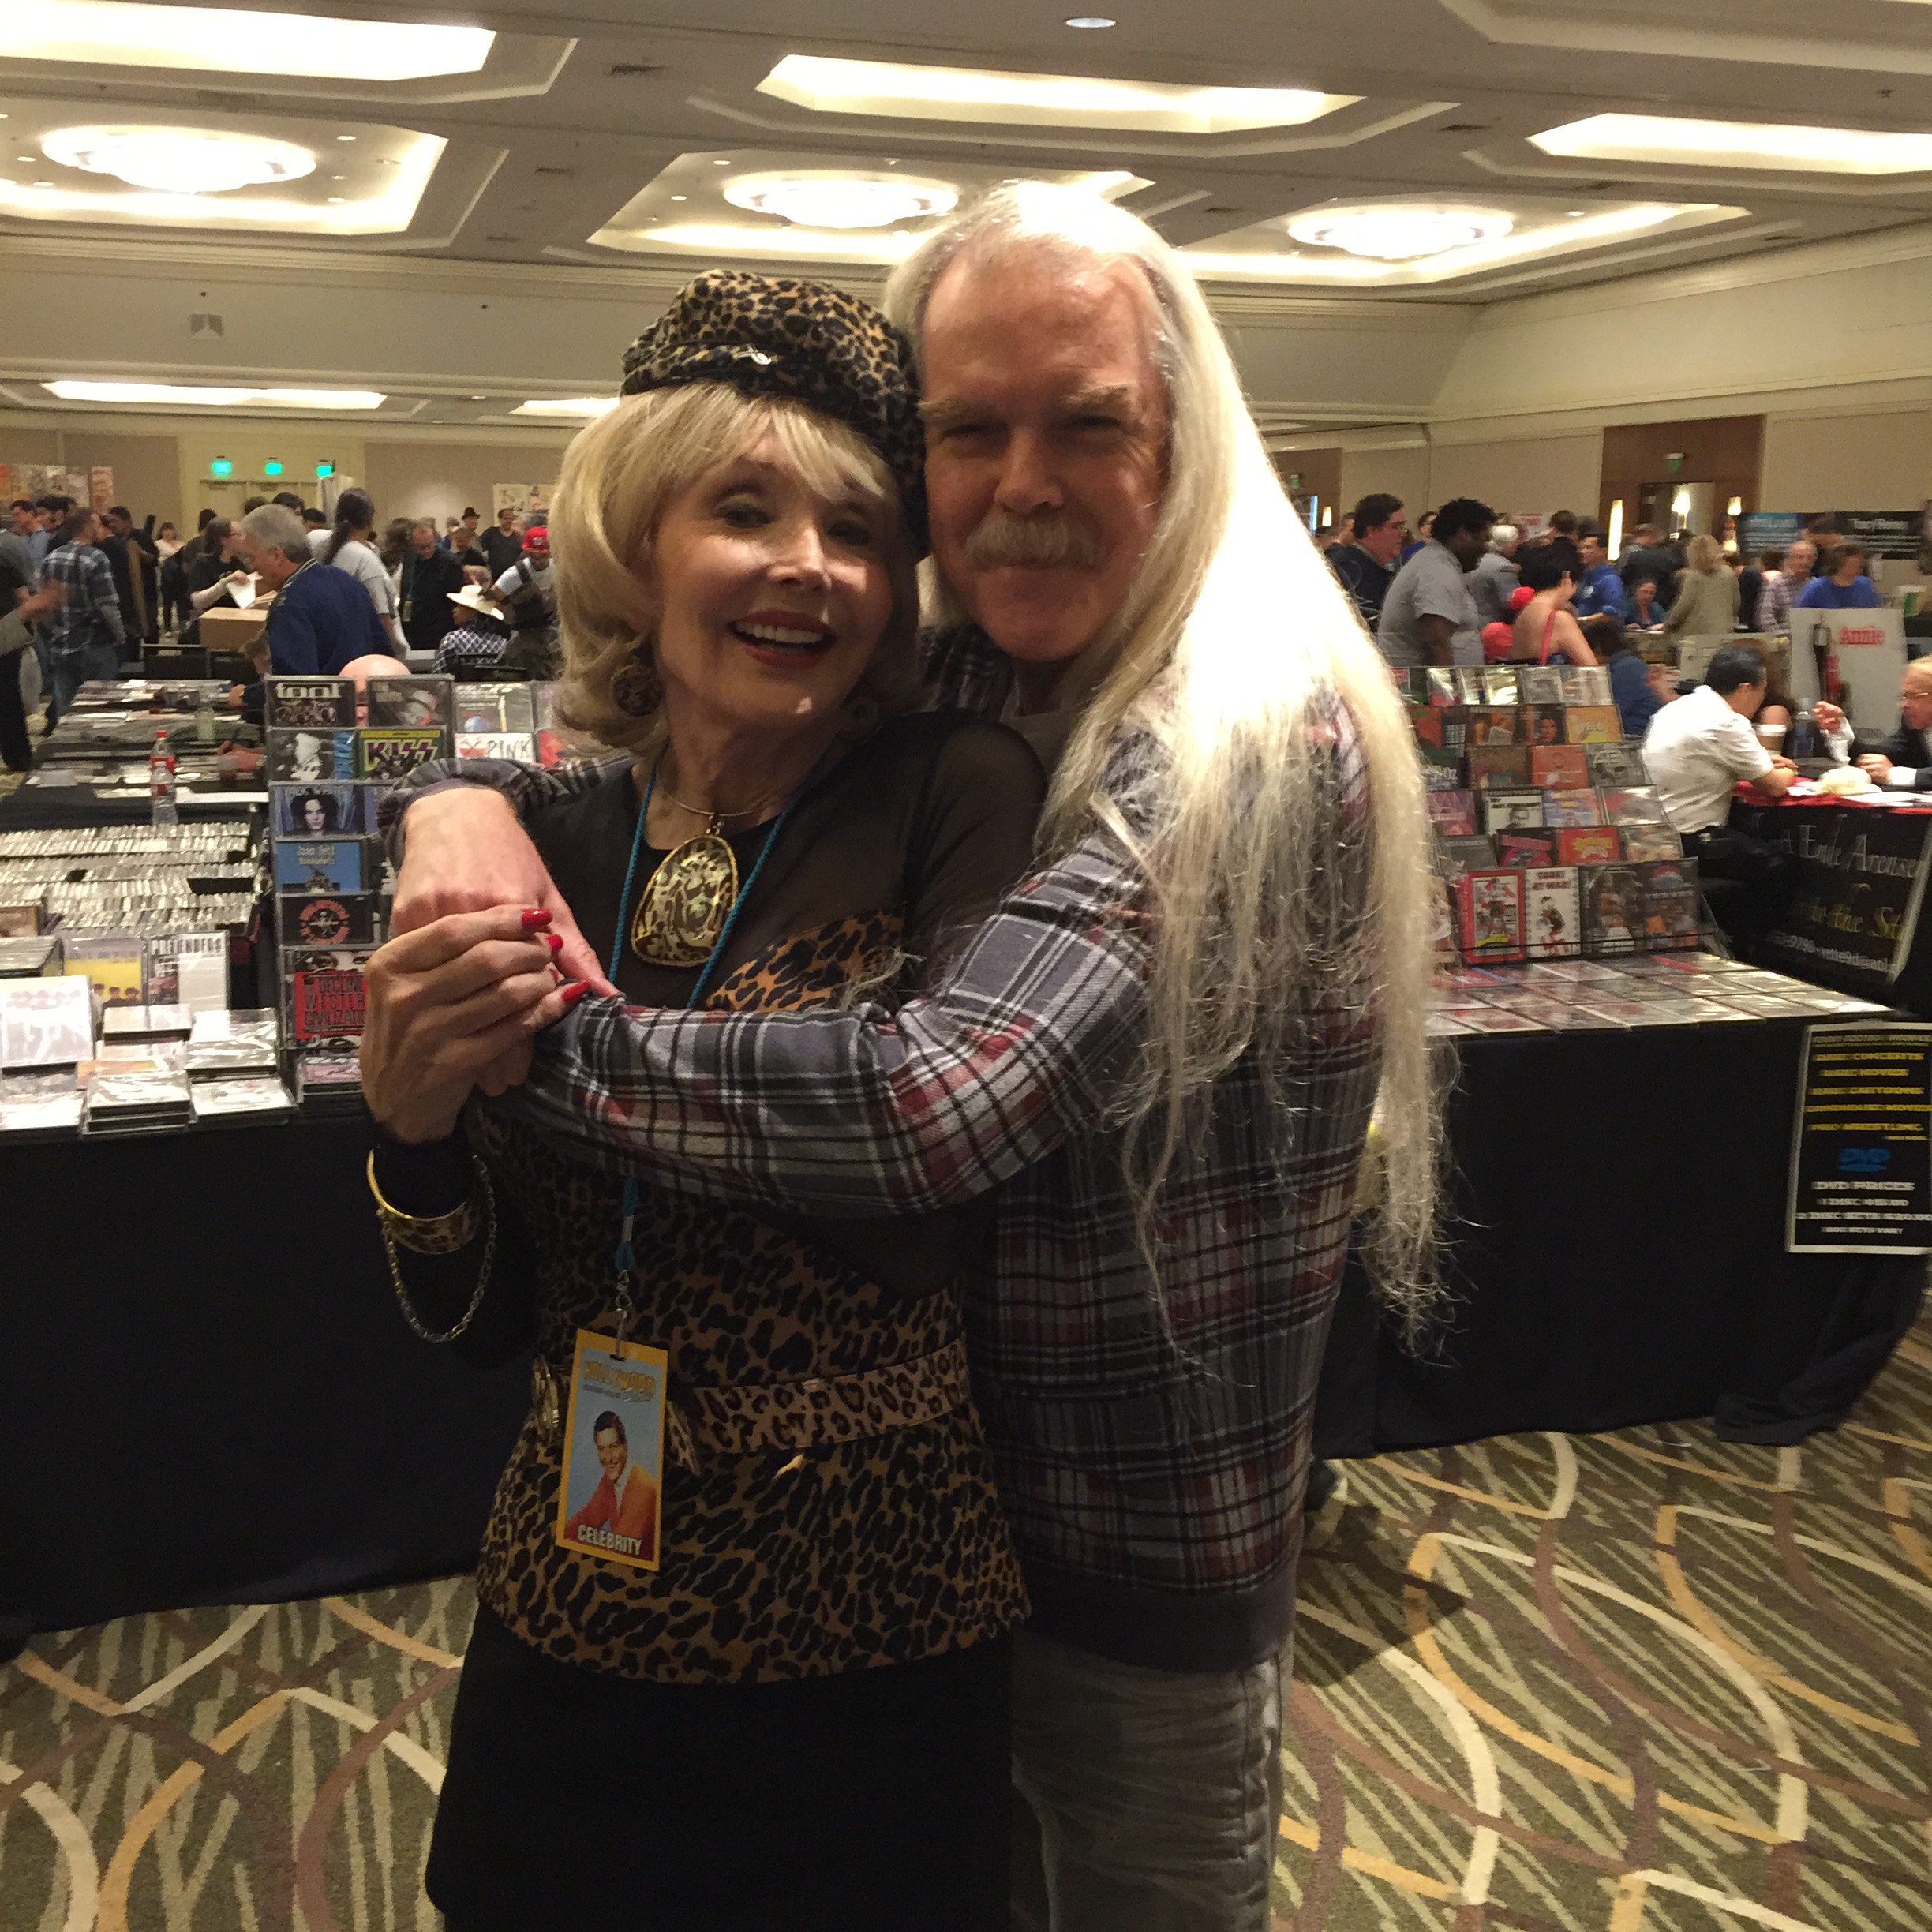 Me and Francine York at an event in Los Angeles on January 24, 2015.